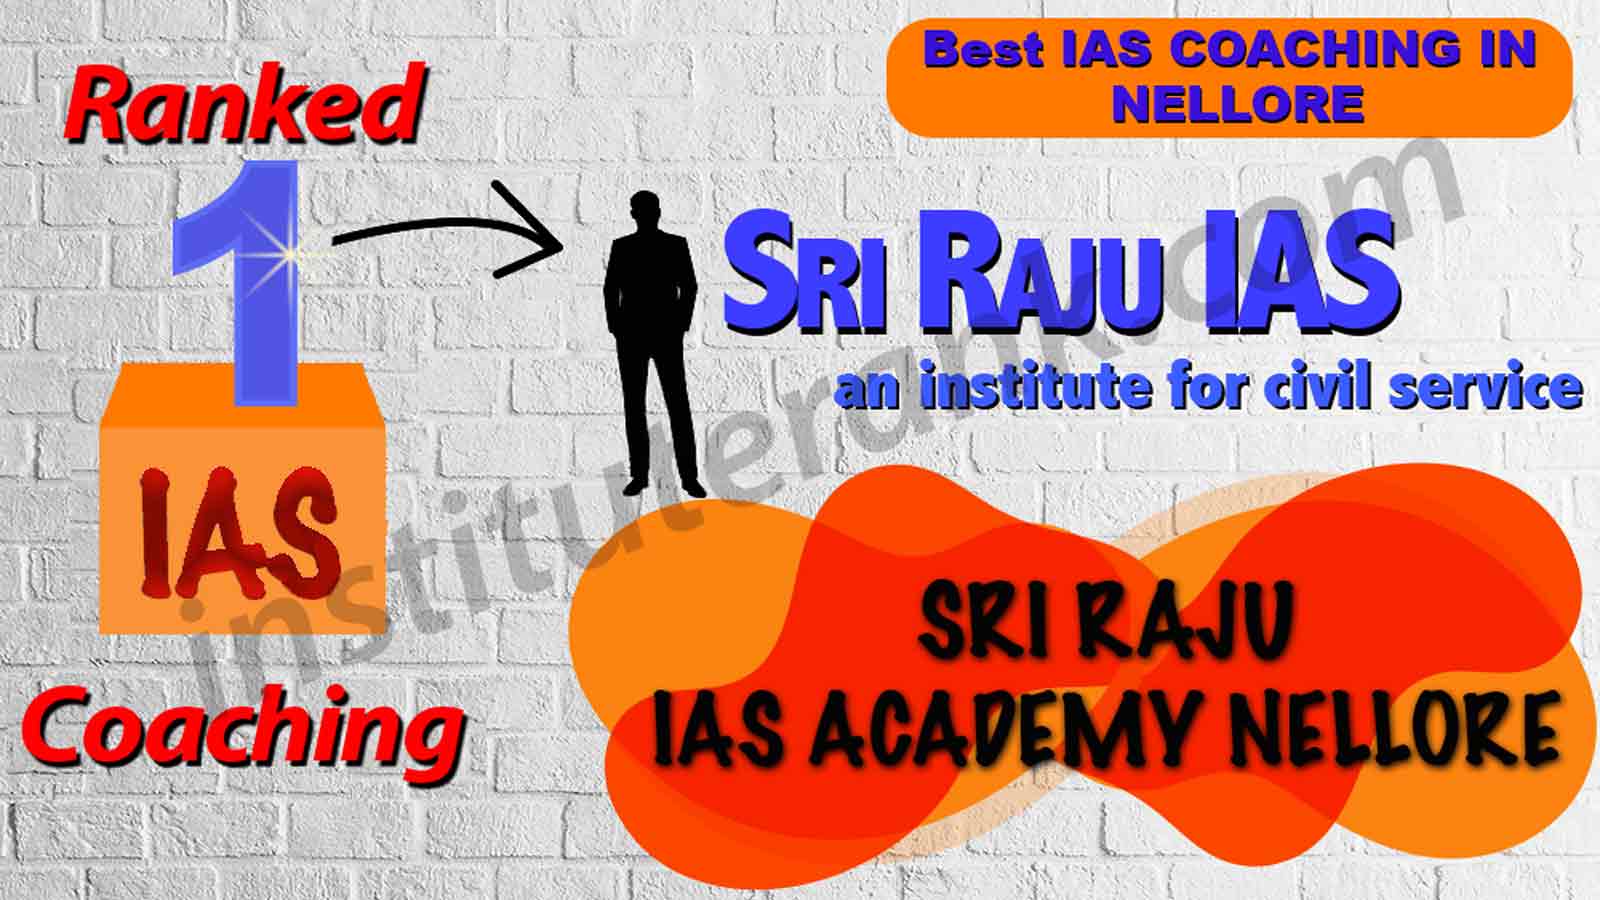 Best IAS Coaching in Nellore